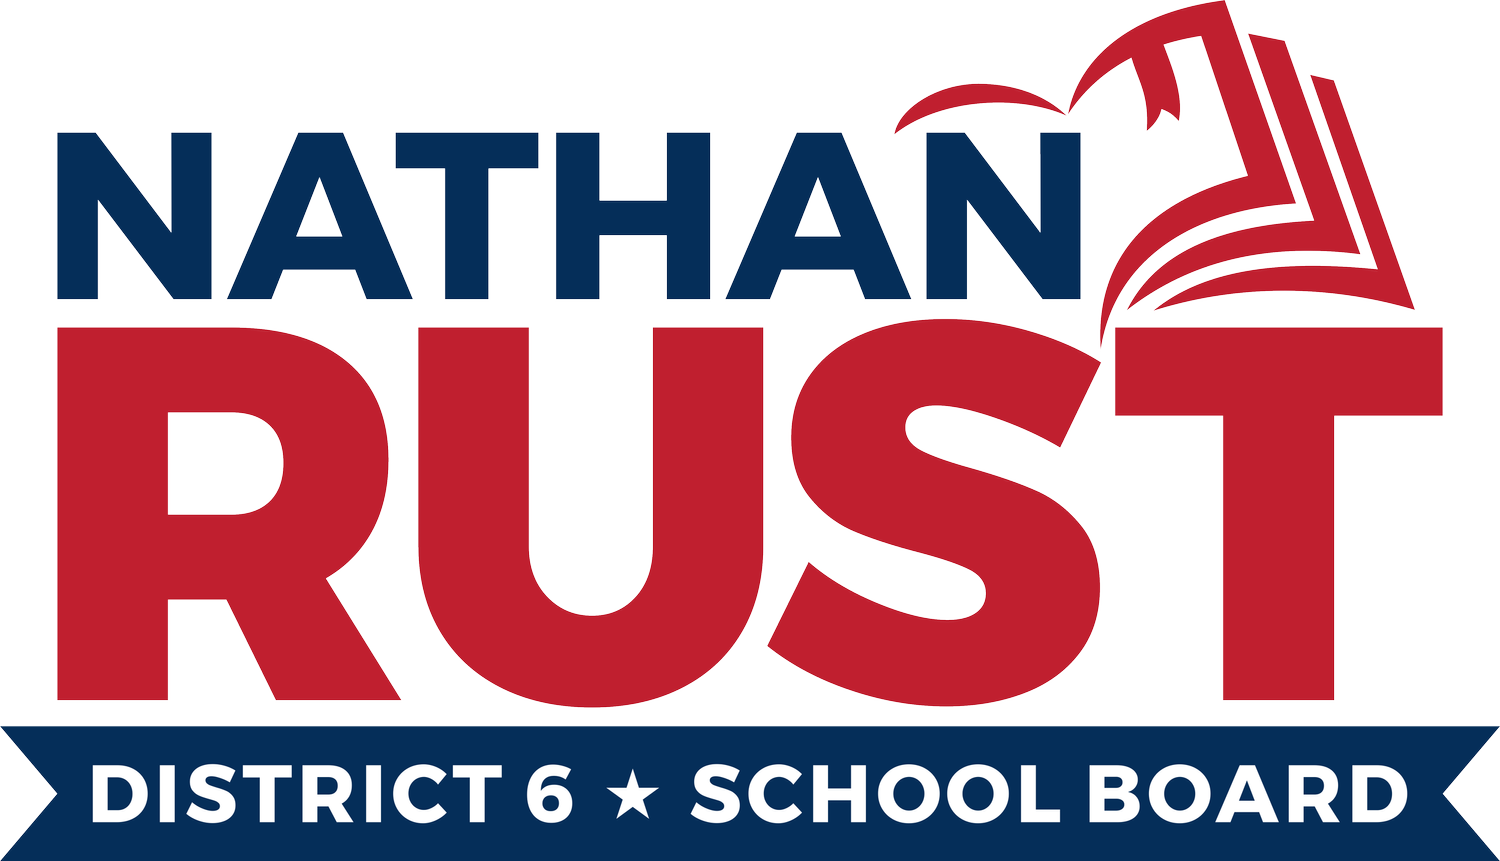 The Campaign for Nathan Rust